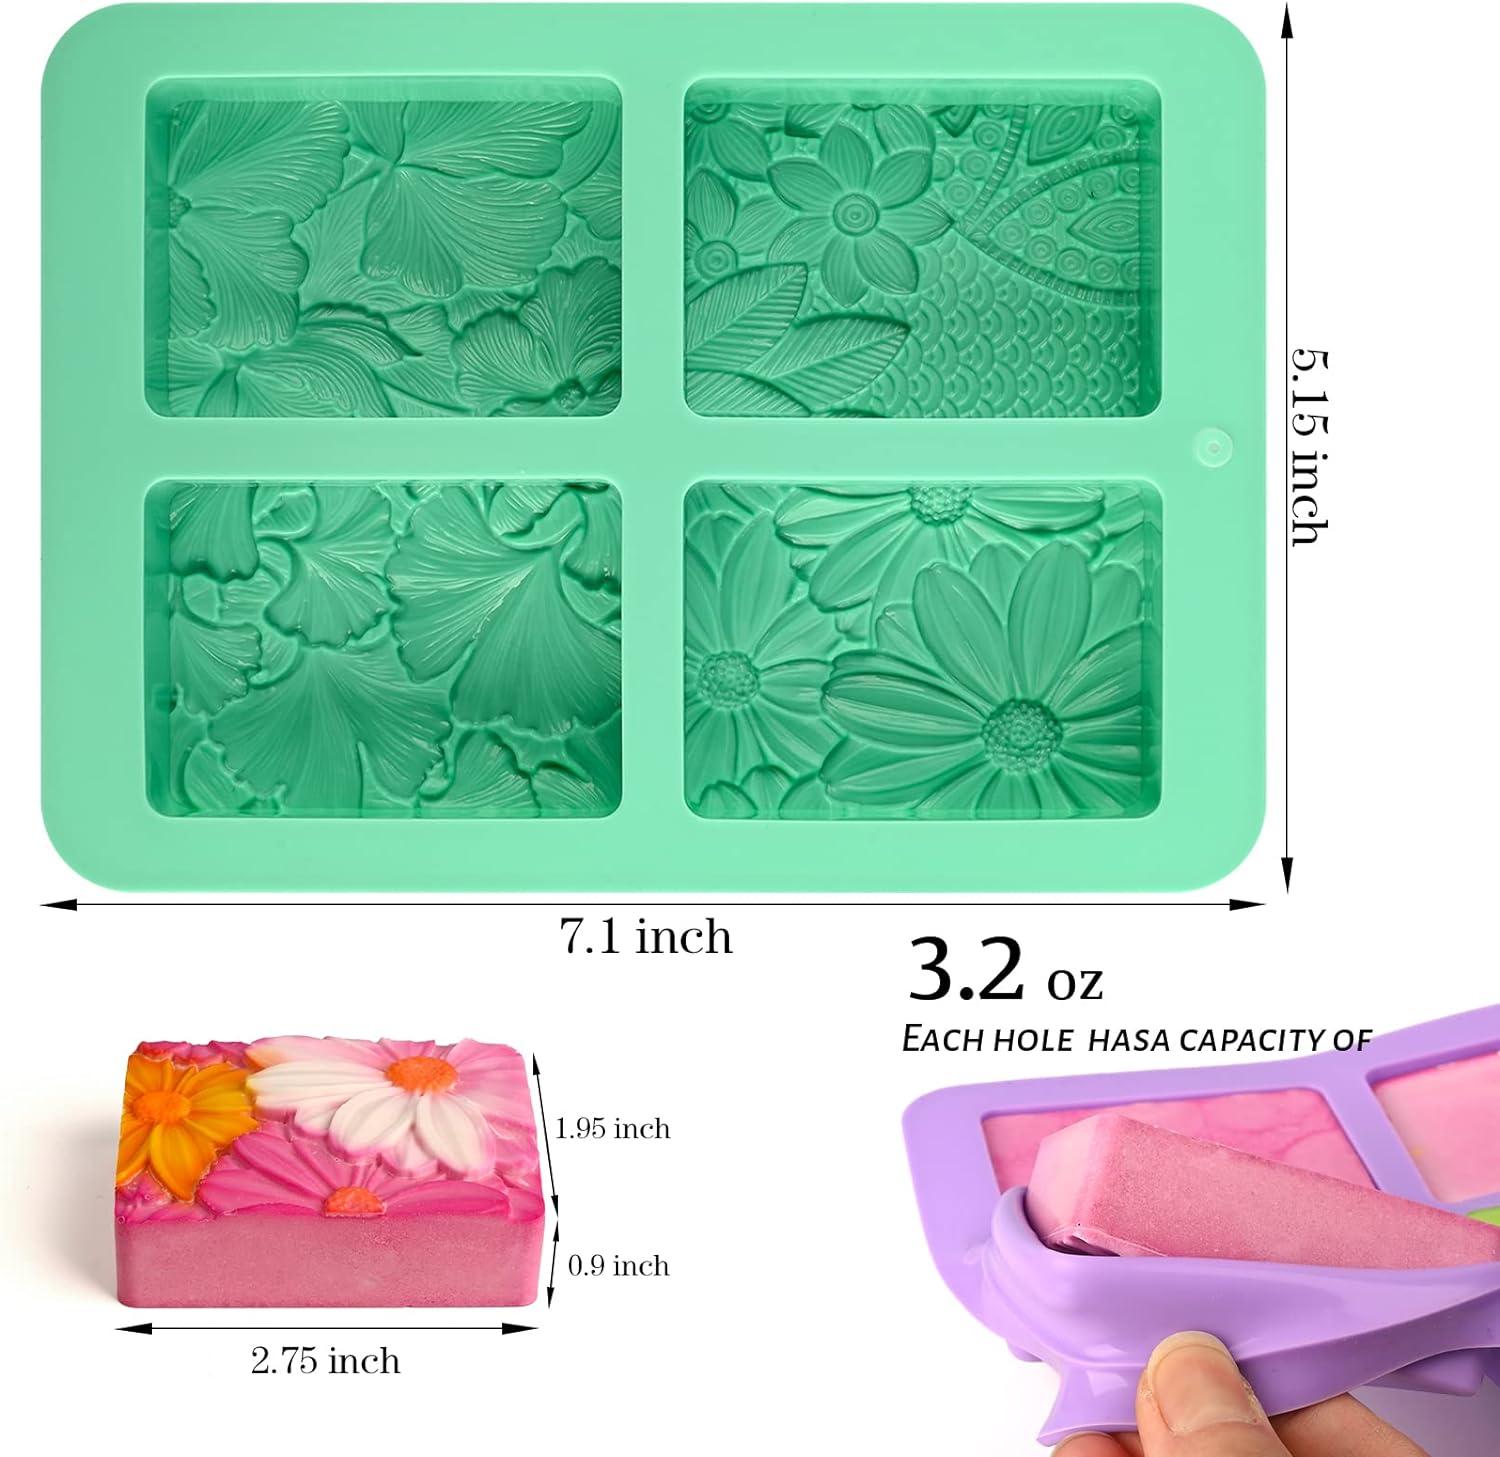 Uiifan 10 Pcs Silicone Soap Molds 2 Sizes Different Flower Shapes